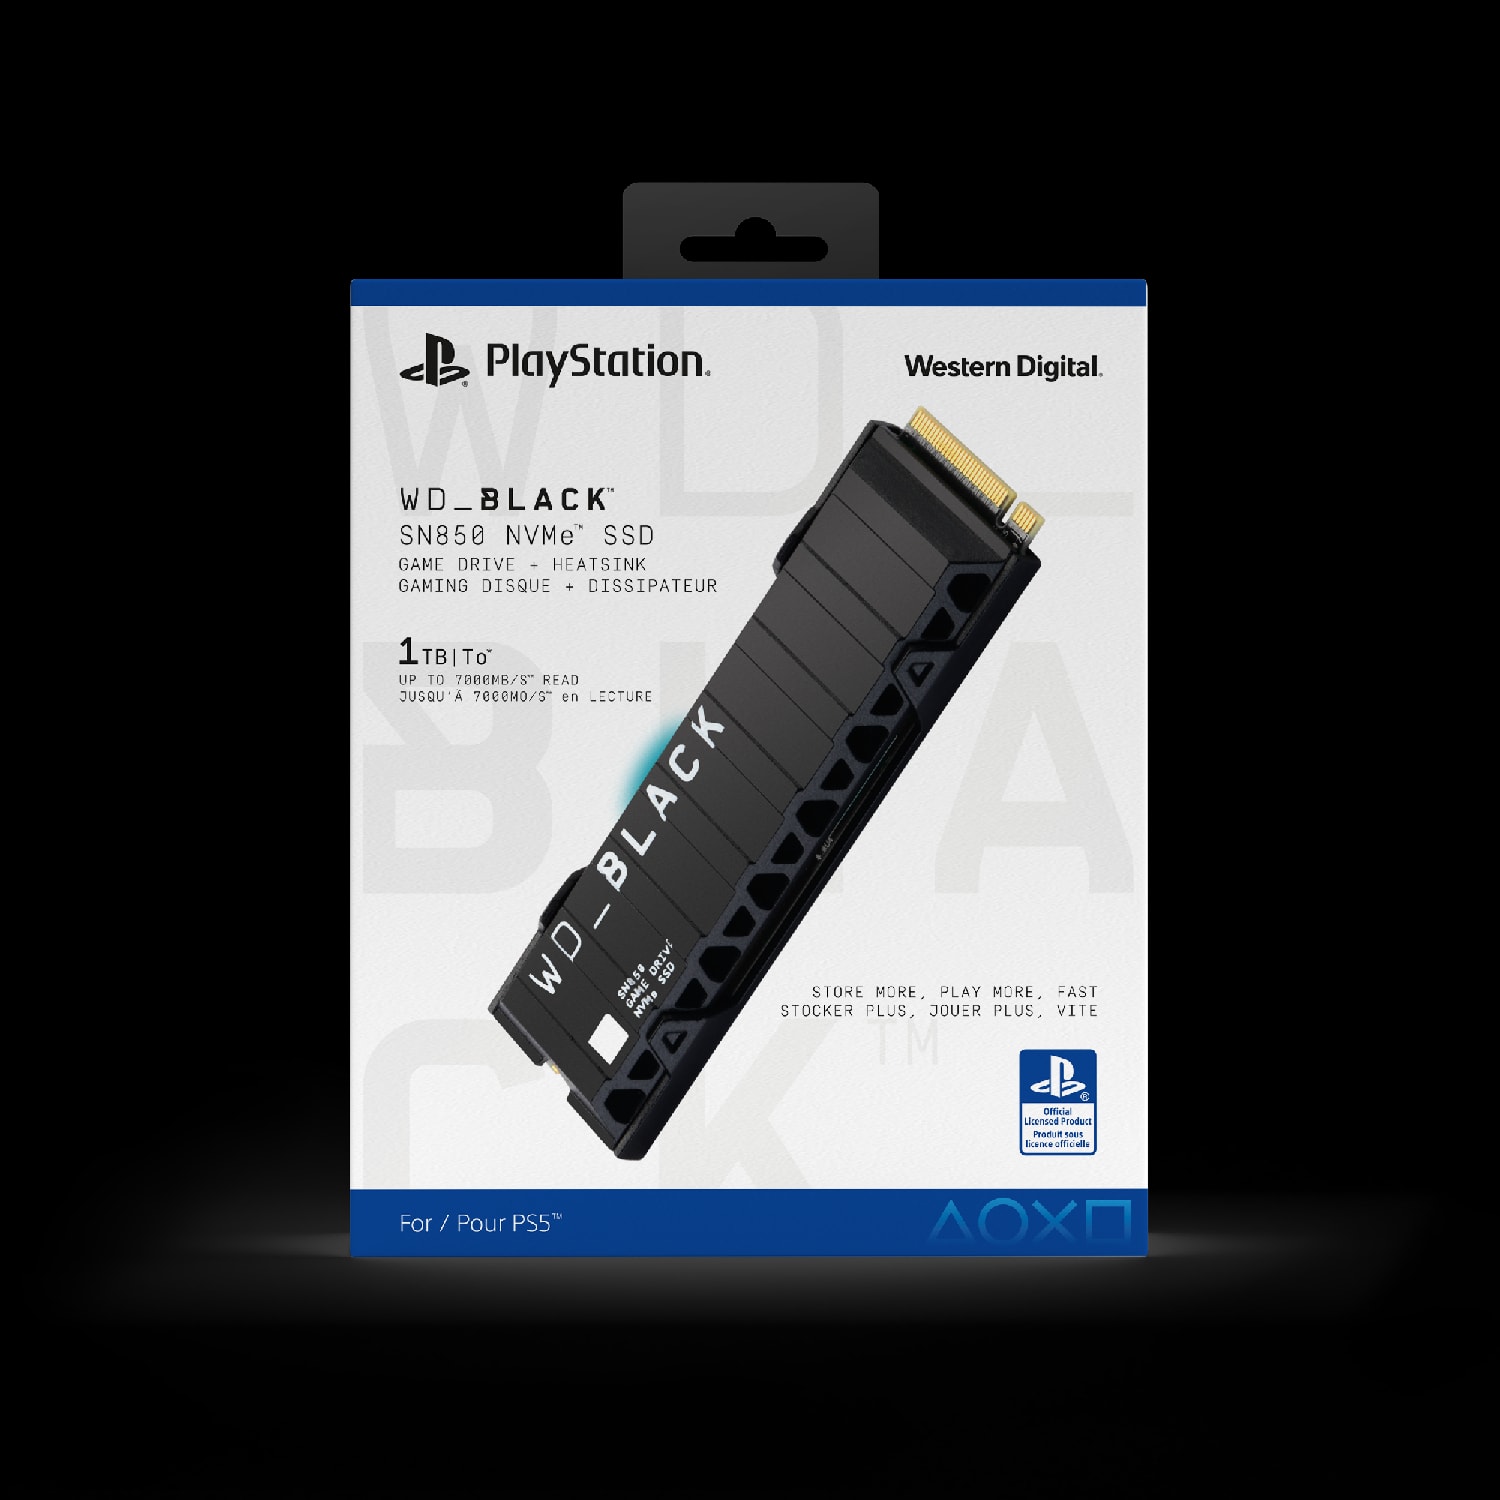 WD_BLACK SN850 NVMe SSD for PS5